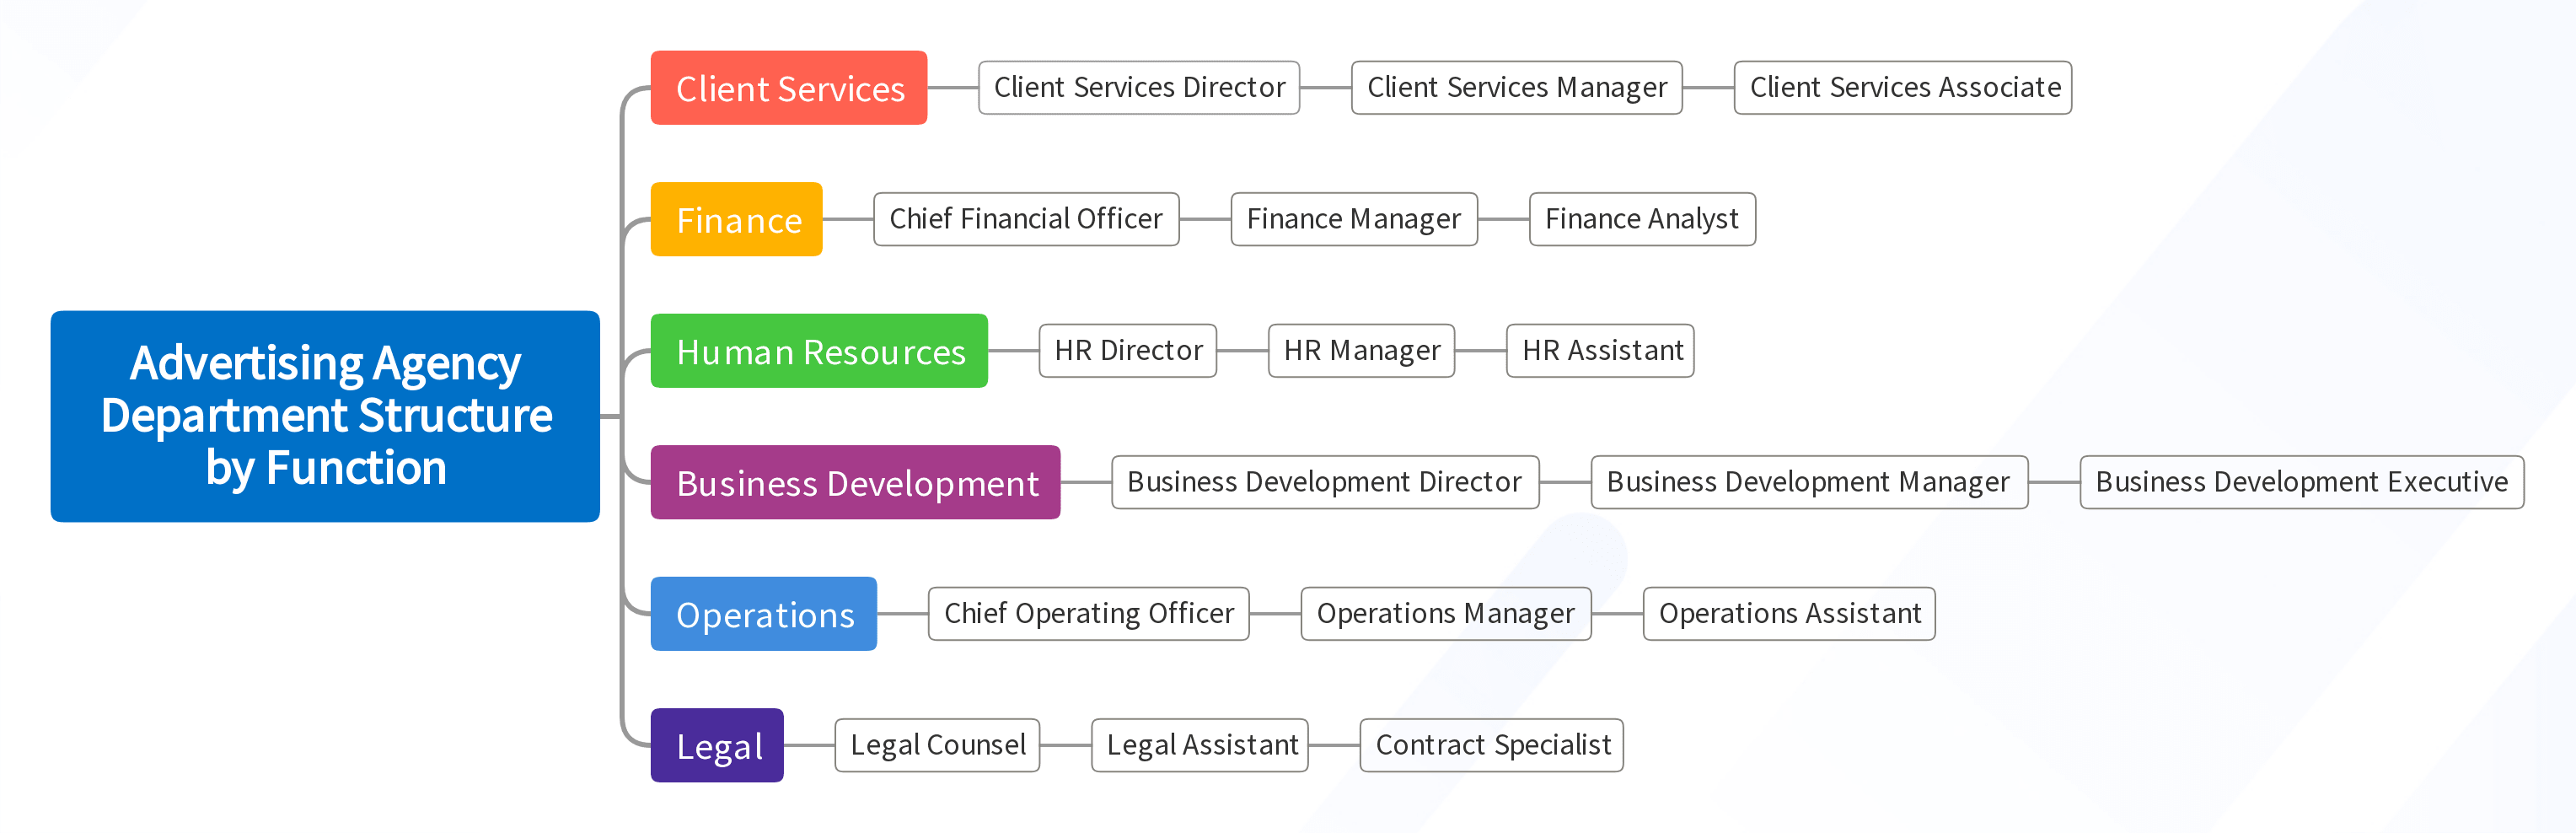 Advertising Agency Department Structure by Function